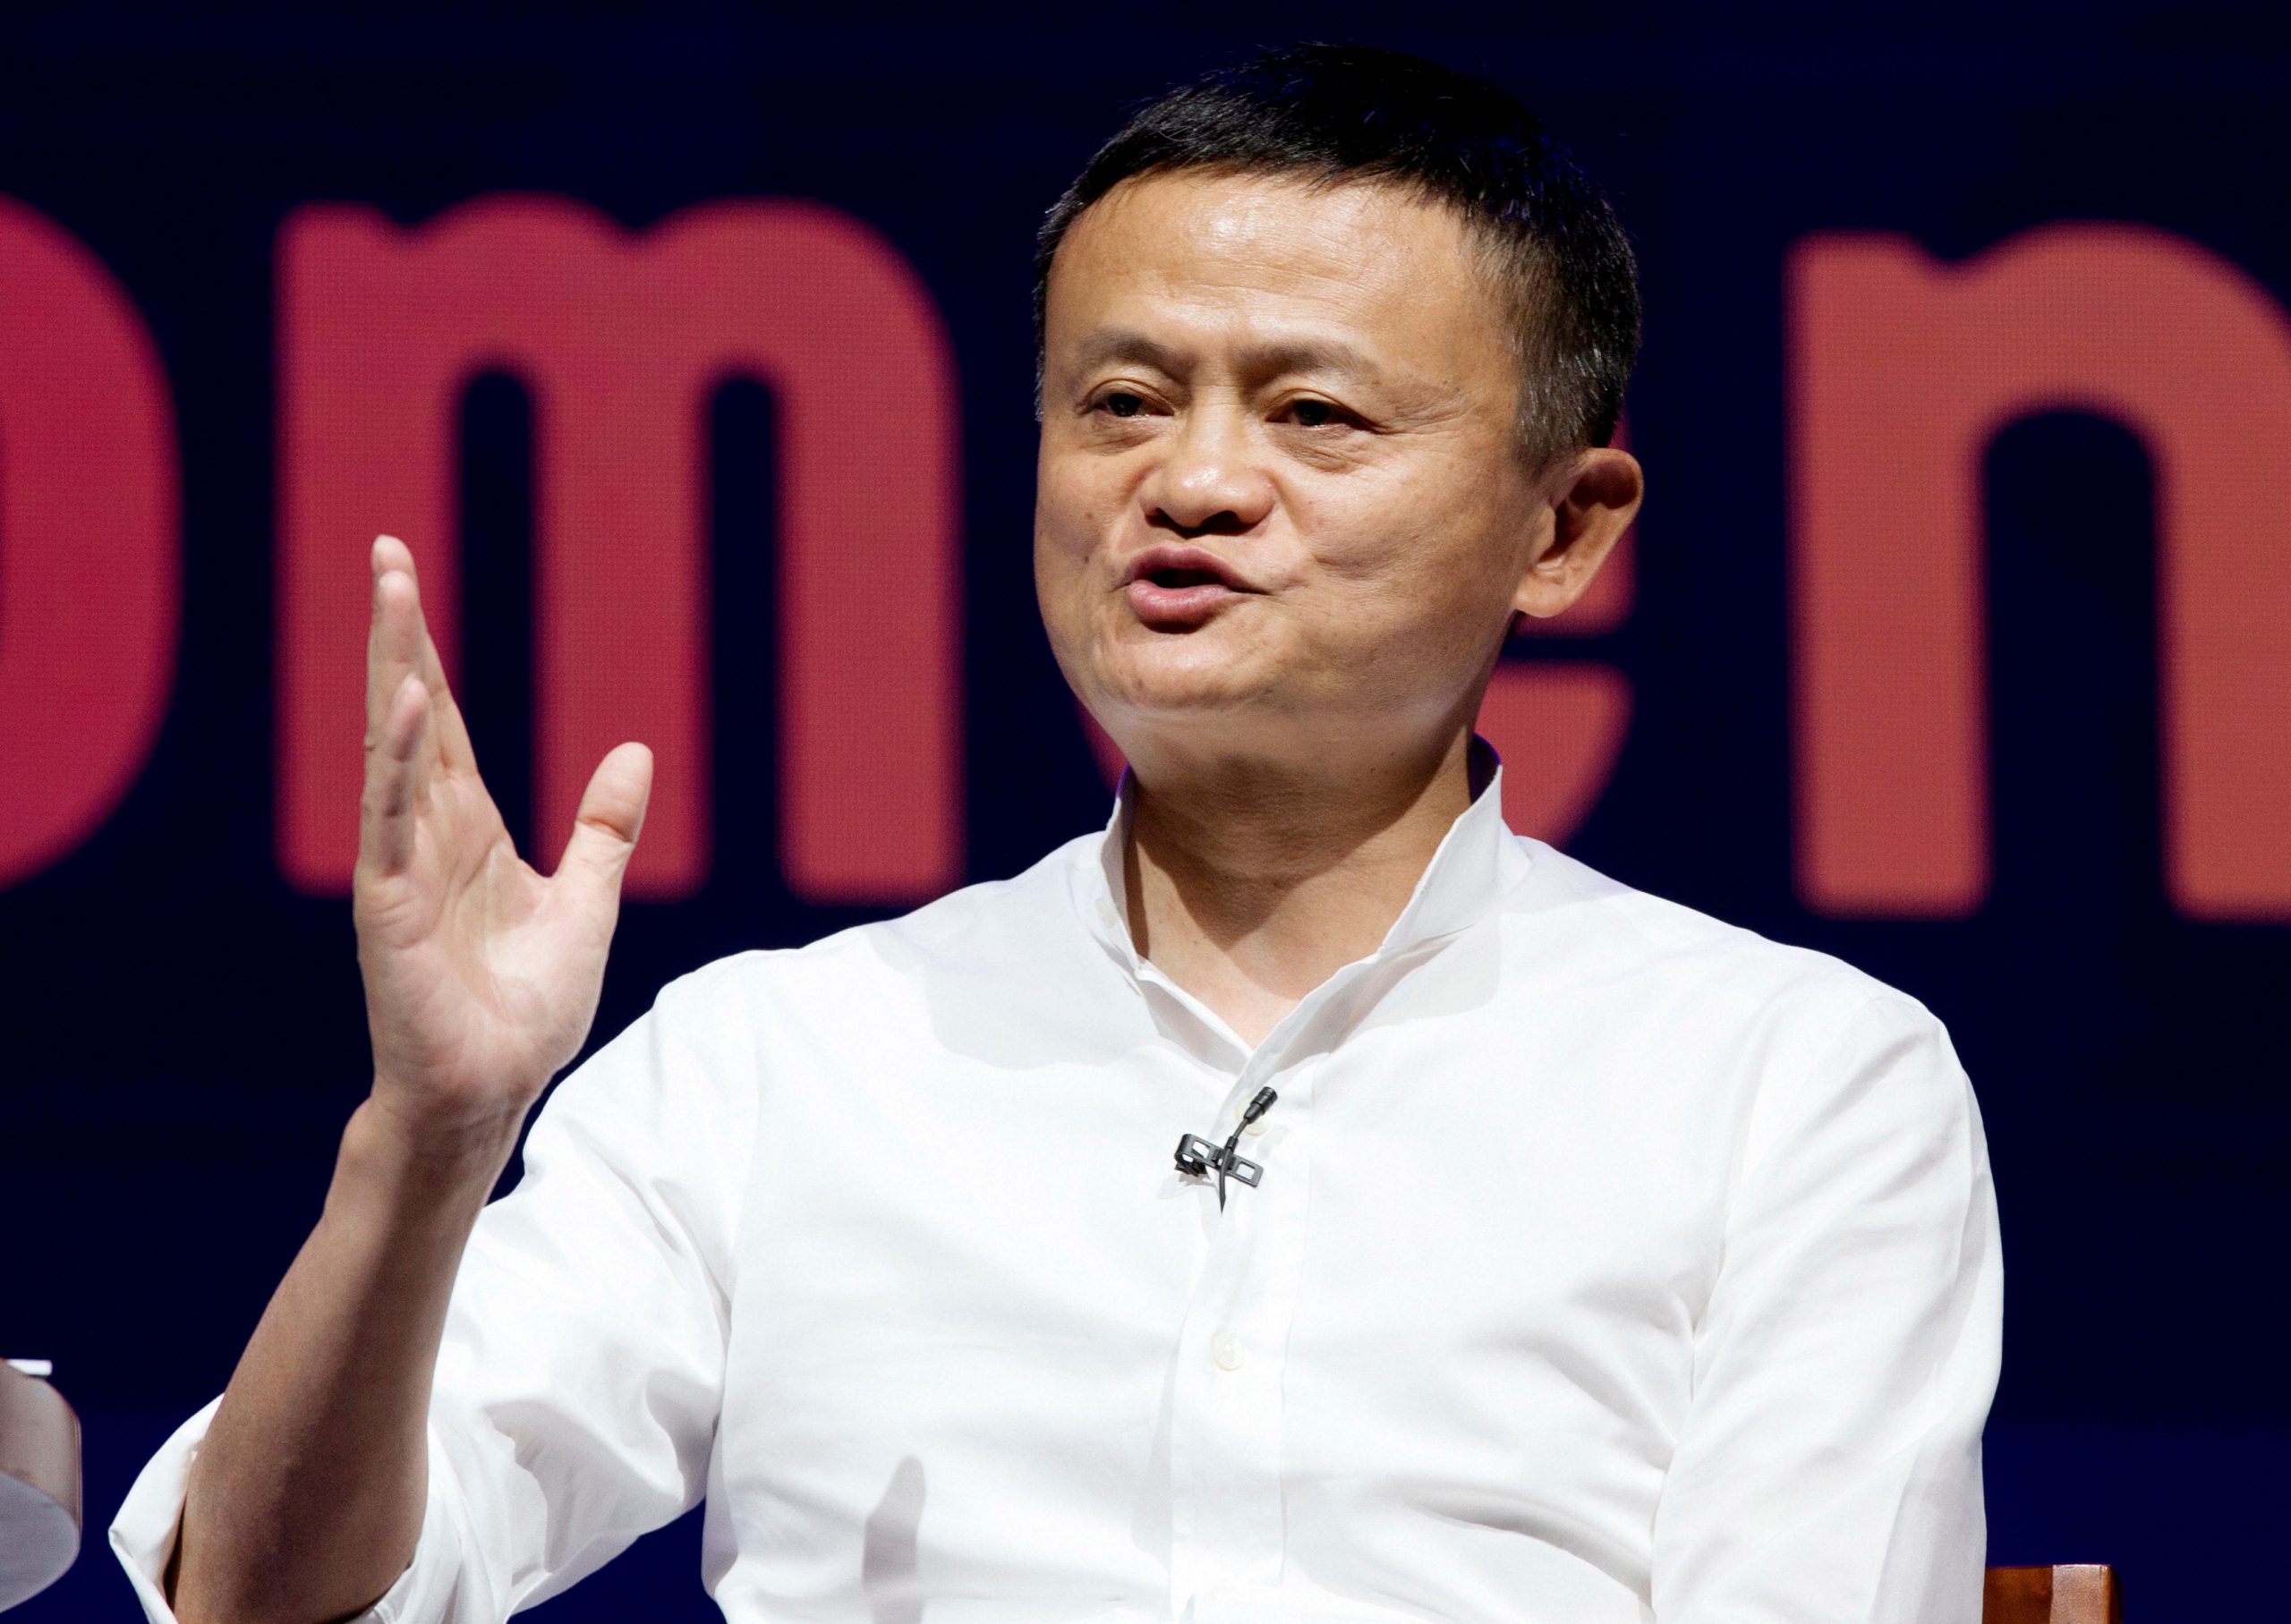 Alibabas shares surge to HK$265 as founder Jack Ma reappears